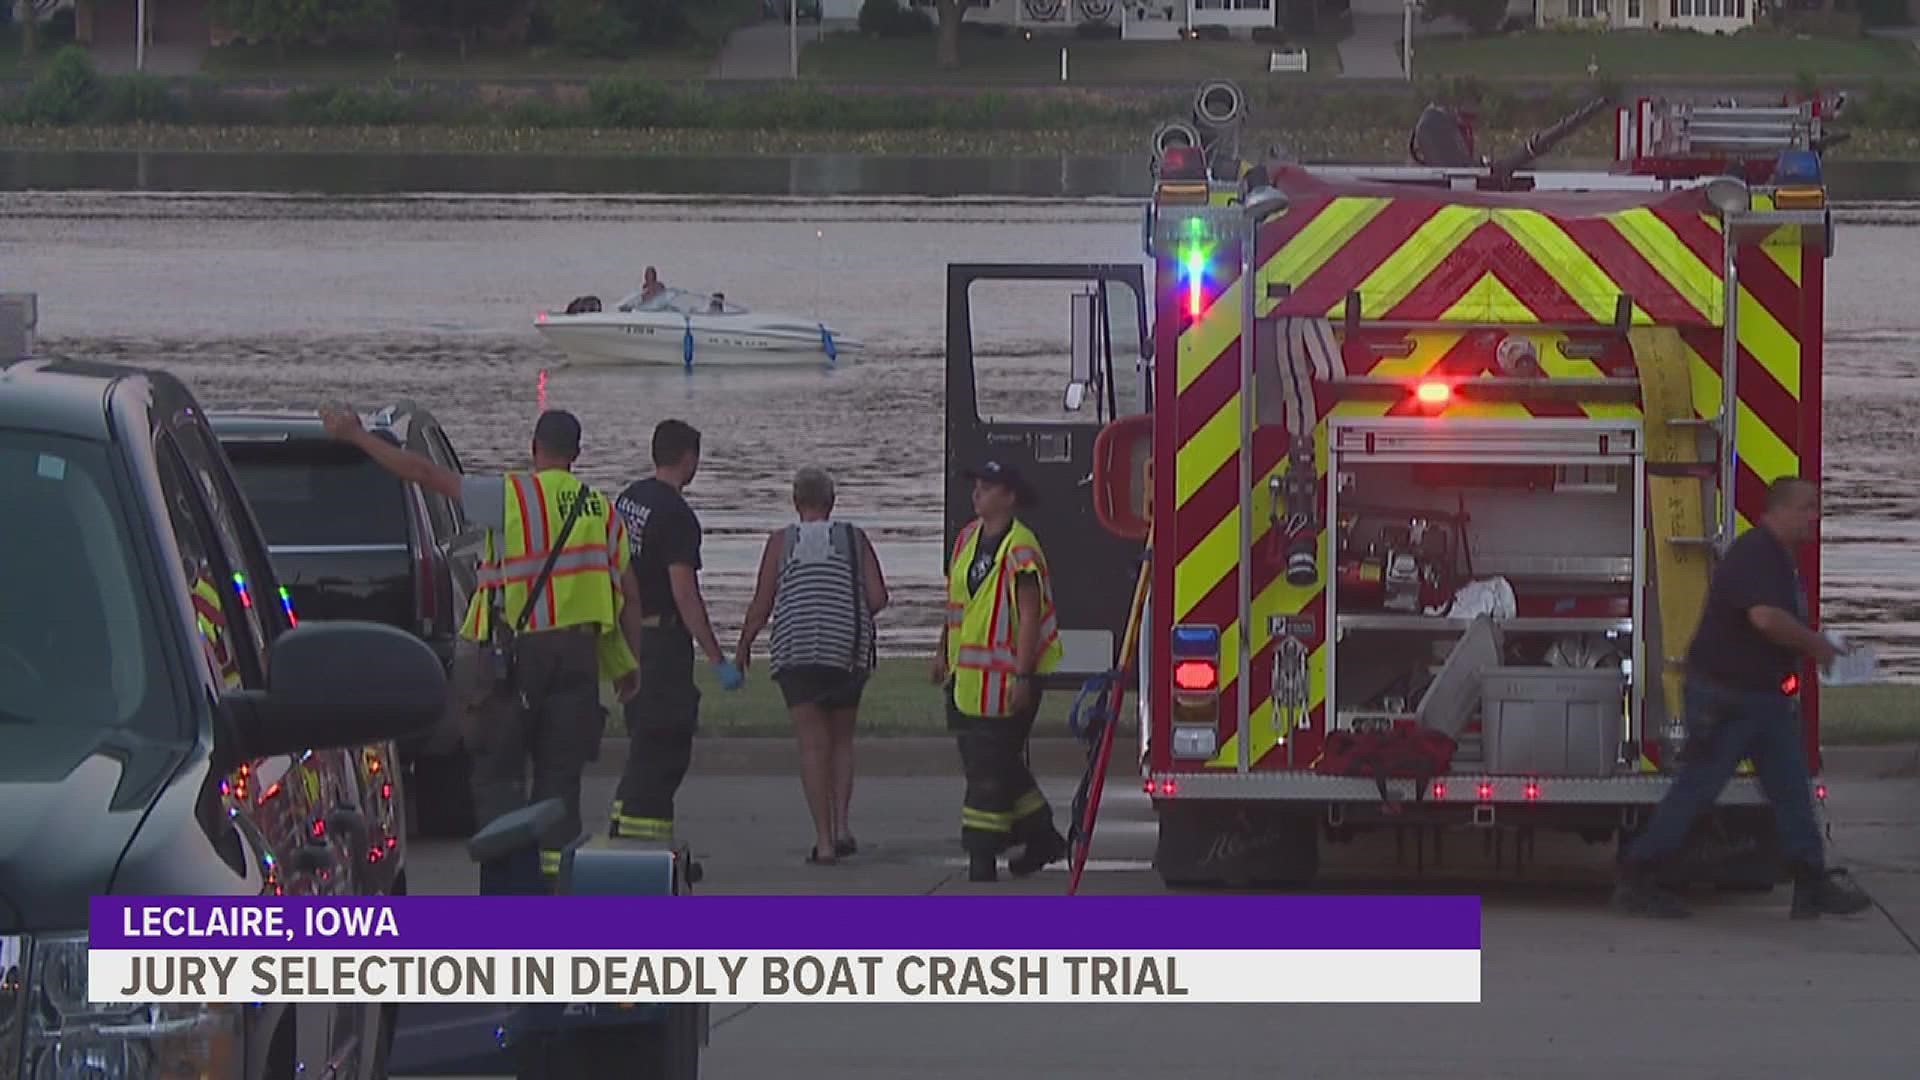 James Thiel faces four counts of involuntary manslaughter for his involvement in the fatal boat collision in 2020 on the LeClaire riverfront.